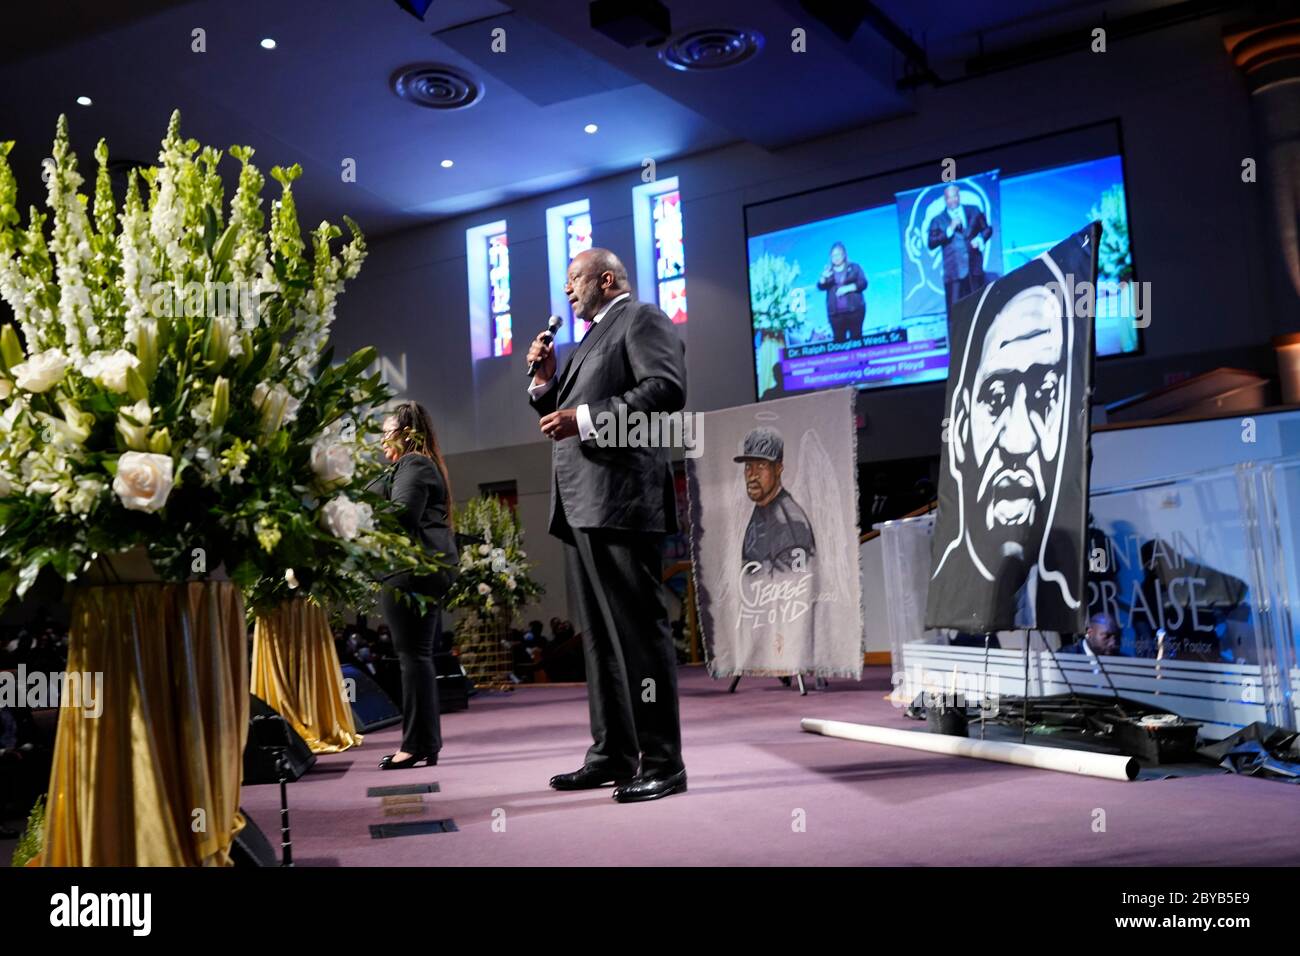 Houston, Texas, USA. 9th June, 2020. Pastor Ralph Douglas West, Sr., speaks during a funeral service for George Floyd at The Fountain of Praise church. Credit: David J. Phillip/POOL/ZUMA Wire/Alamy Live News Stock Photo